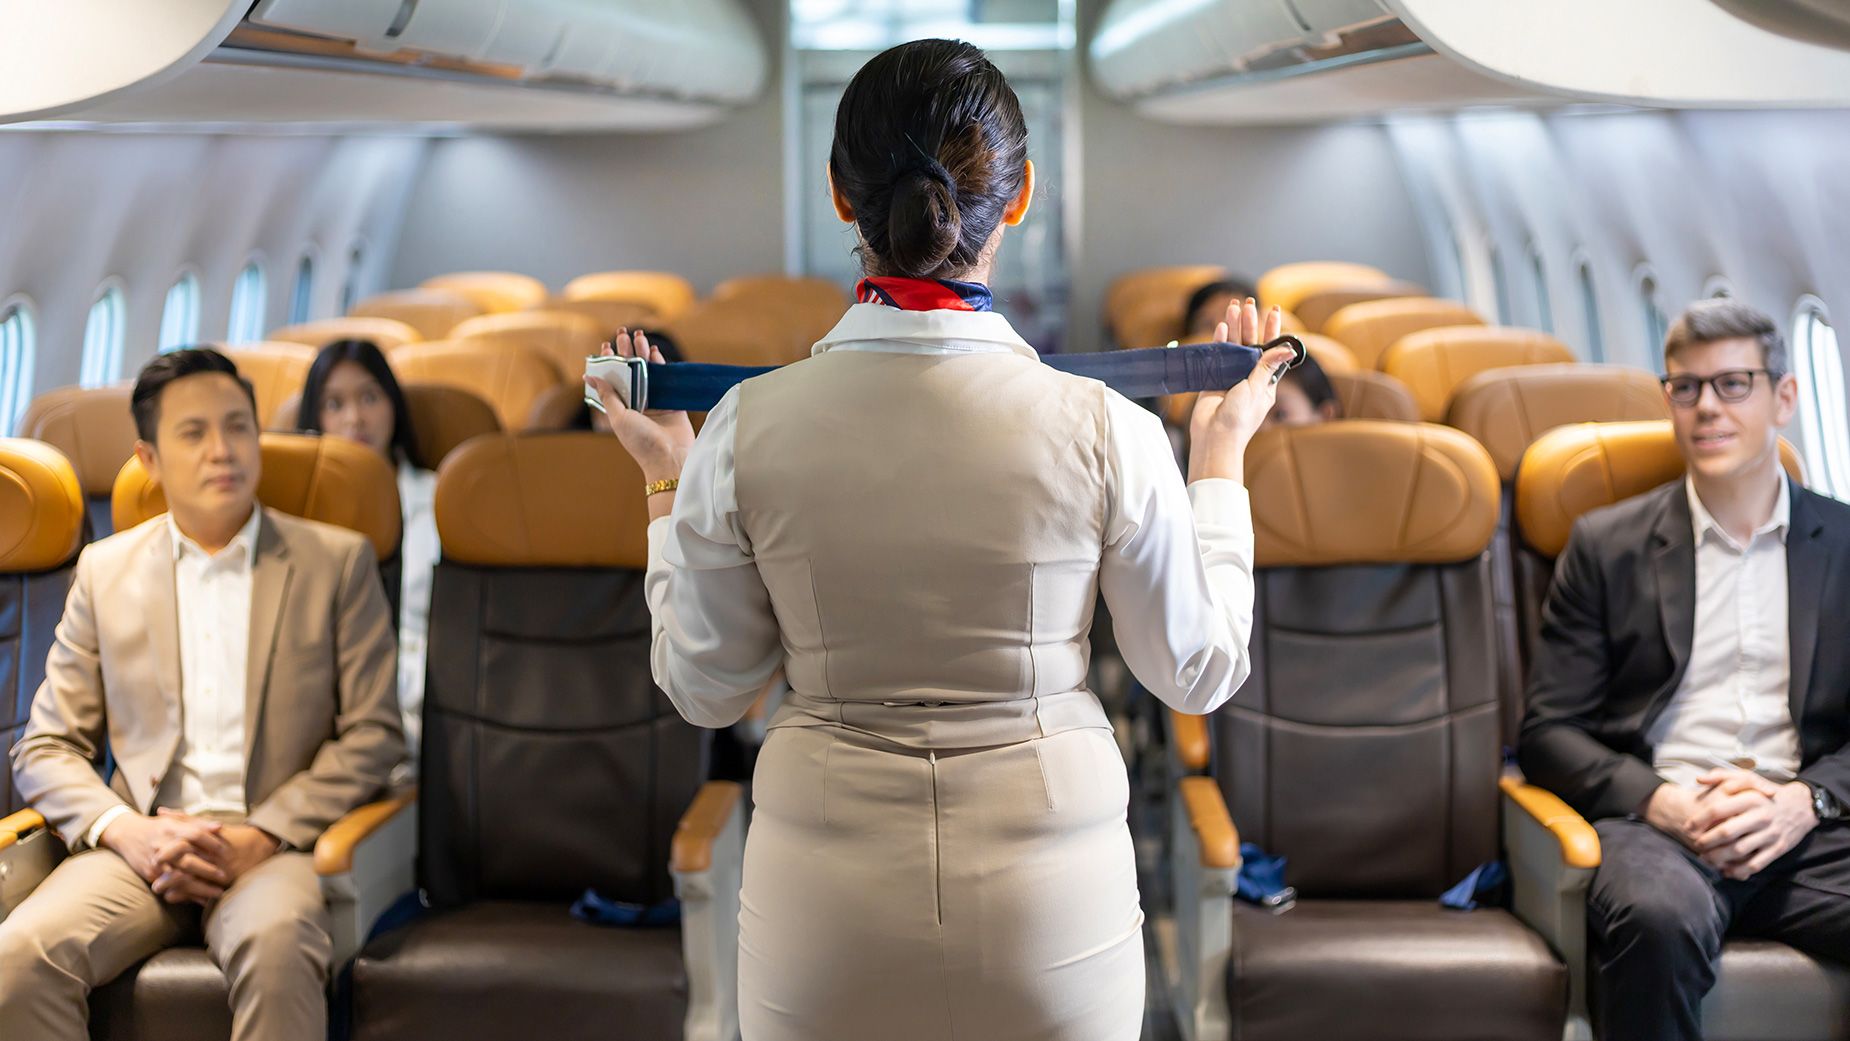 Becoming a flight attendant is more difficult than getting into